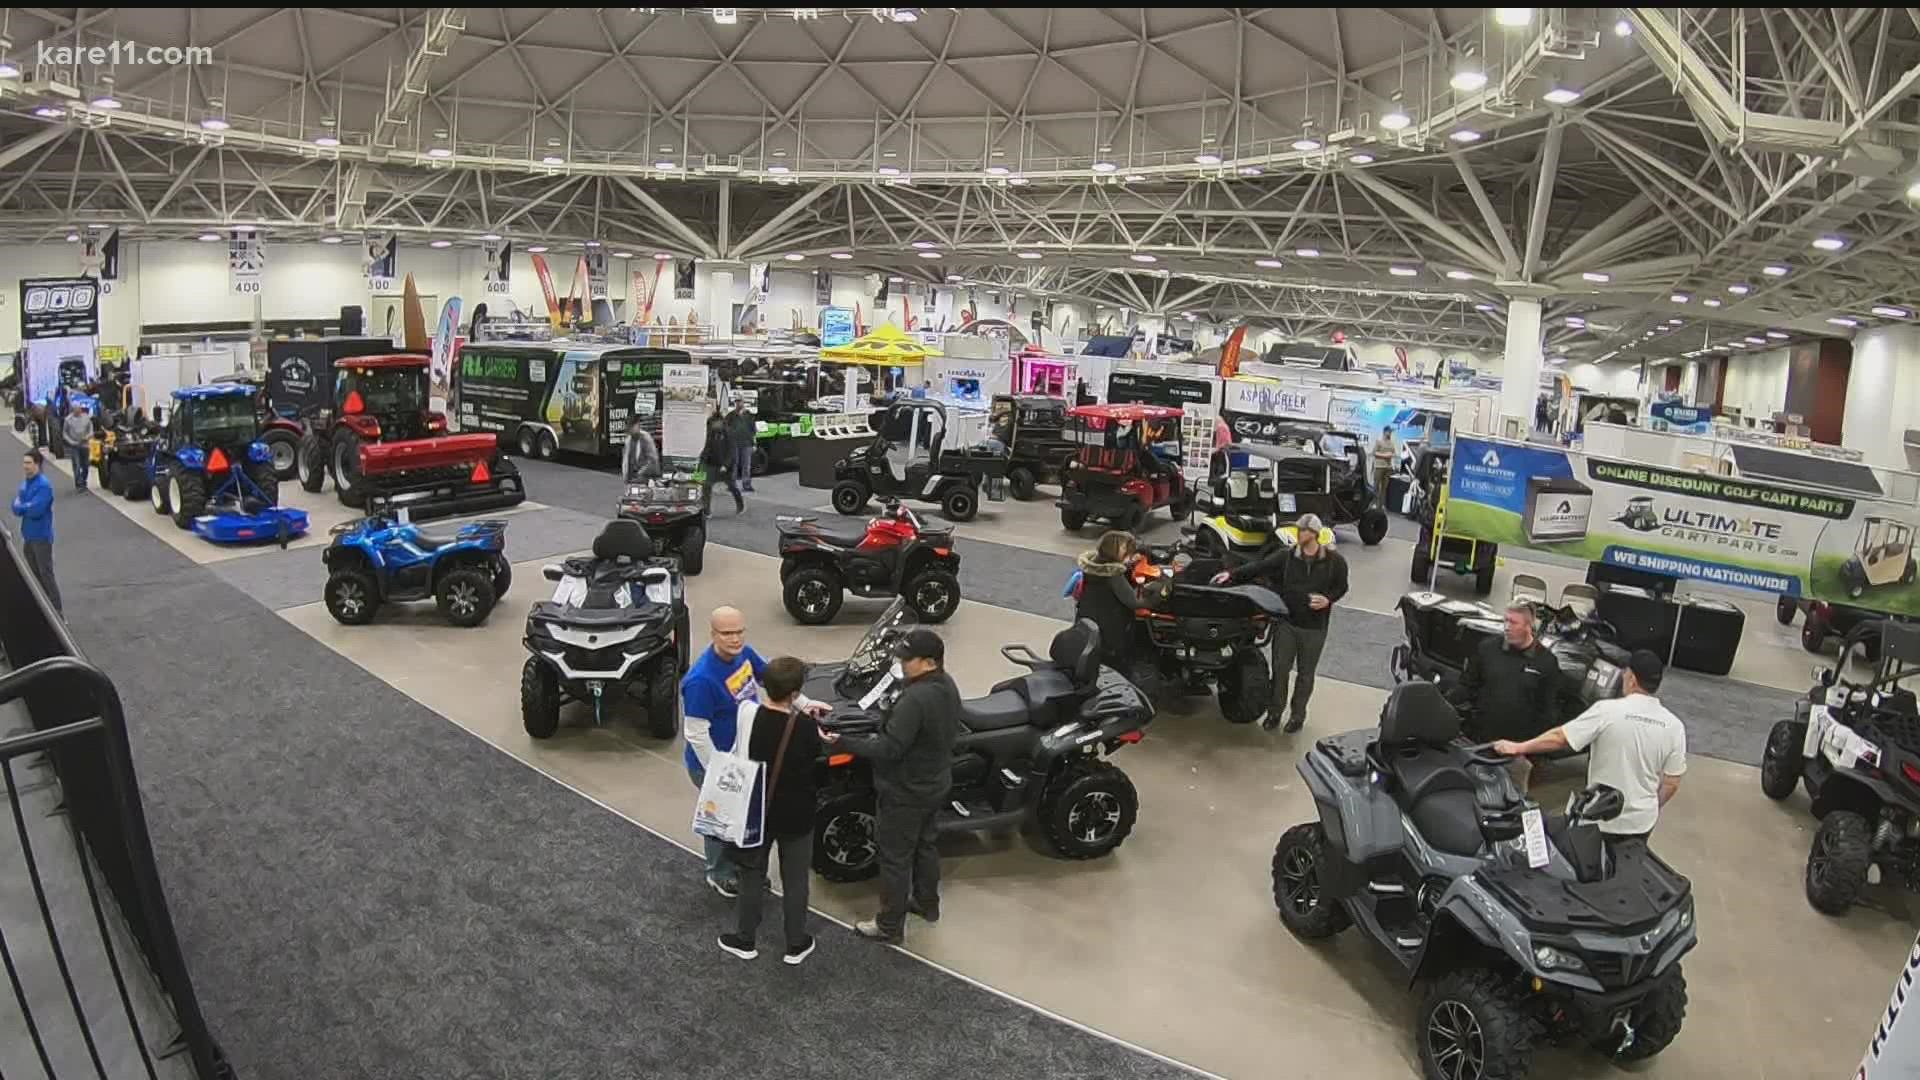 With gas prices at a historic level, sales teams for ATVs, boats, waverunners, and other gas-powered outdoor sports vehicles say they expect to feel the squeeze.